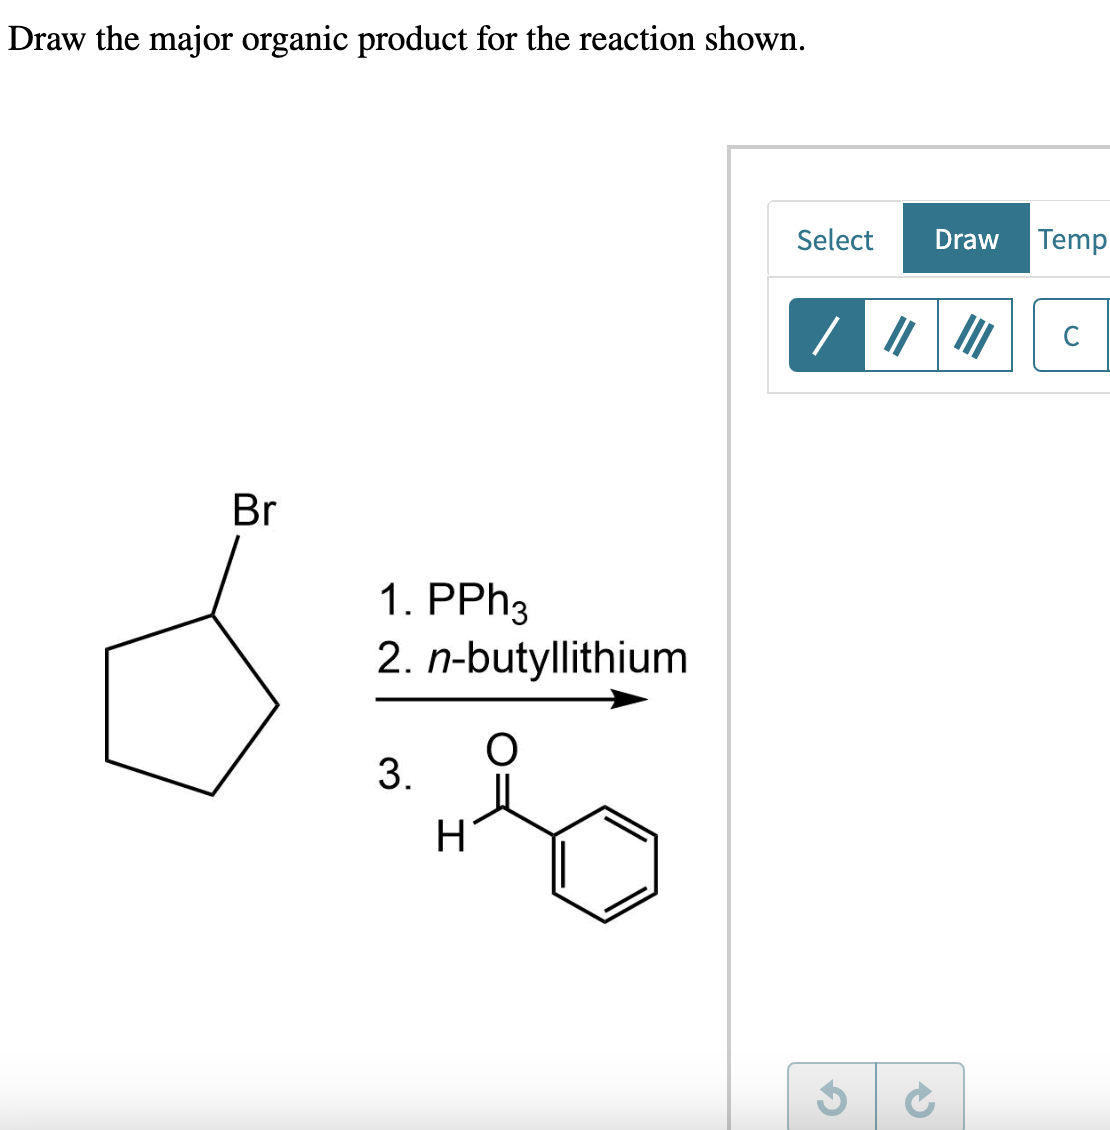 Draw the major organic product for the reaction shown.
Br
1. PPh3
2. n-butyllithium
3.
H
2
Select
Draw Temp
/ "
C